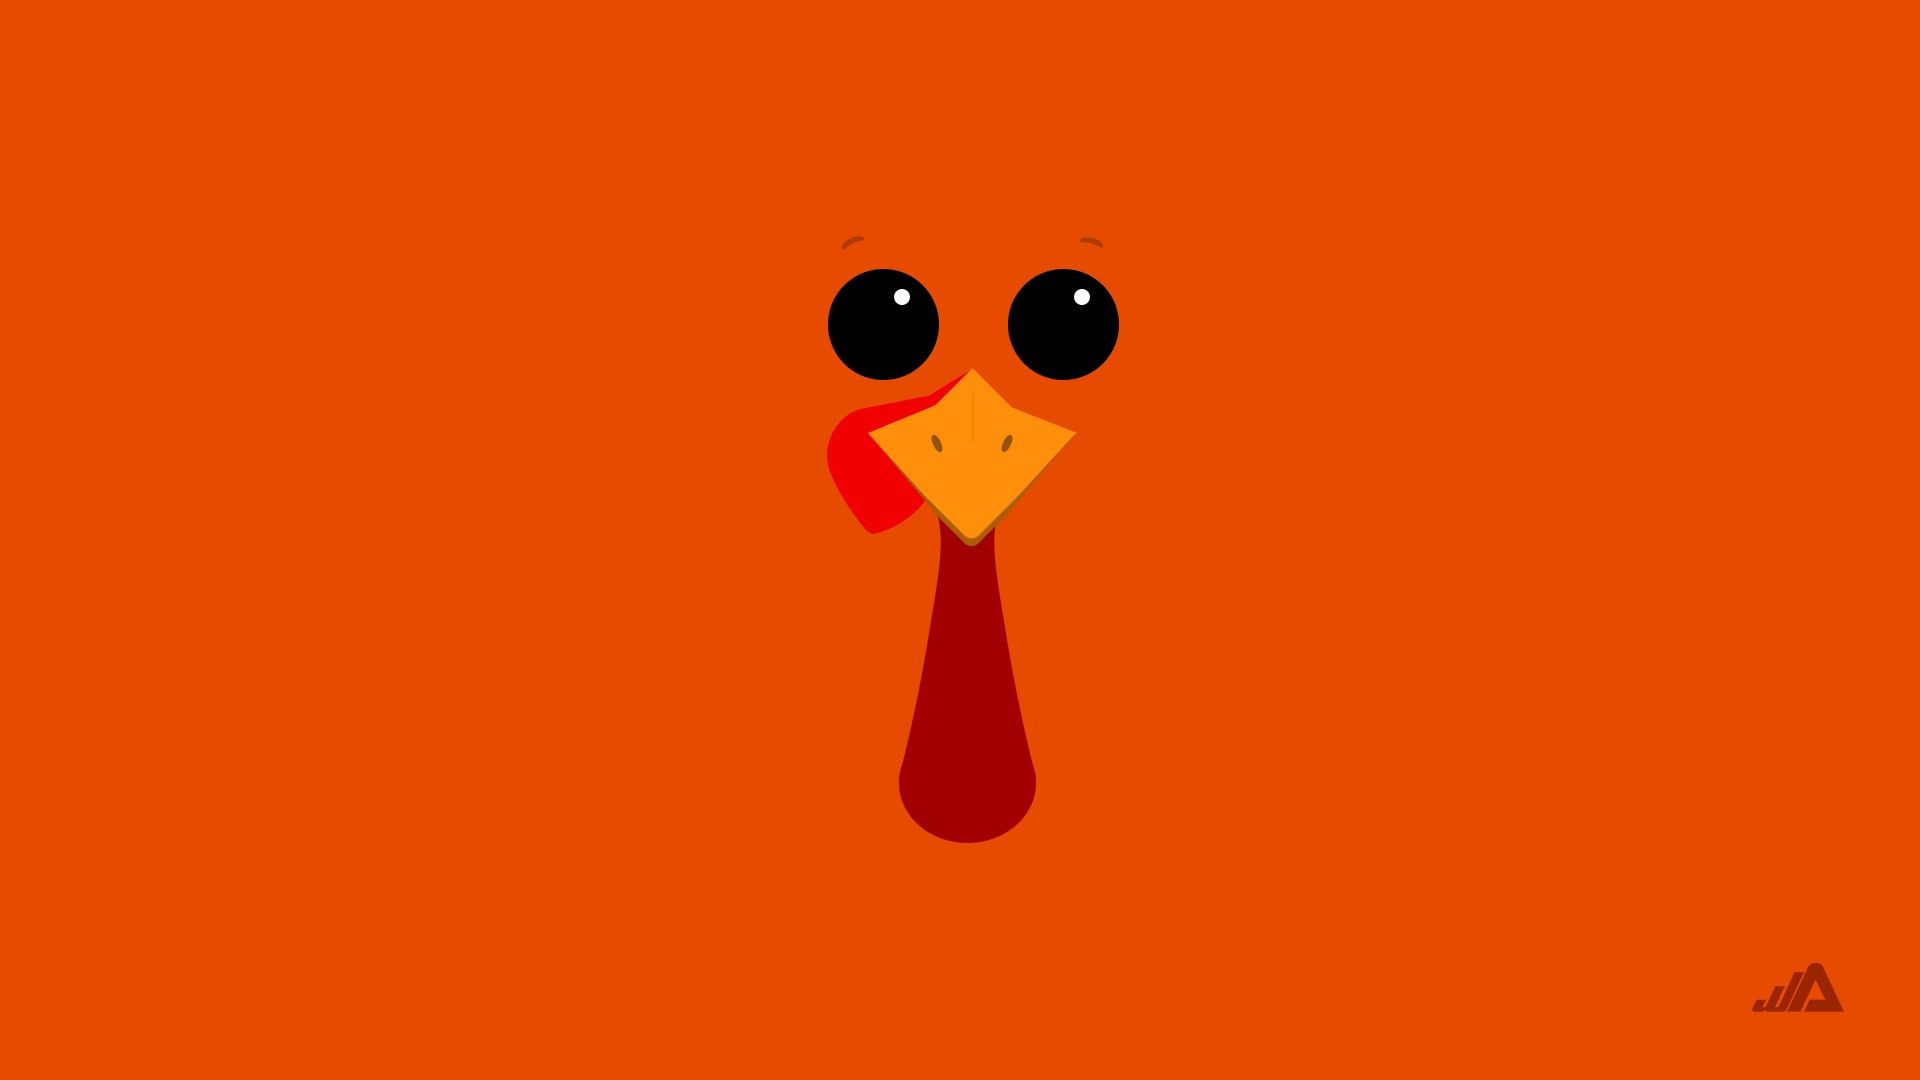 Funny Thanksgiving Themes. Events. Thanksgiving wallpaper